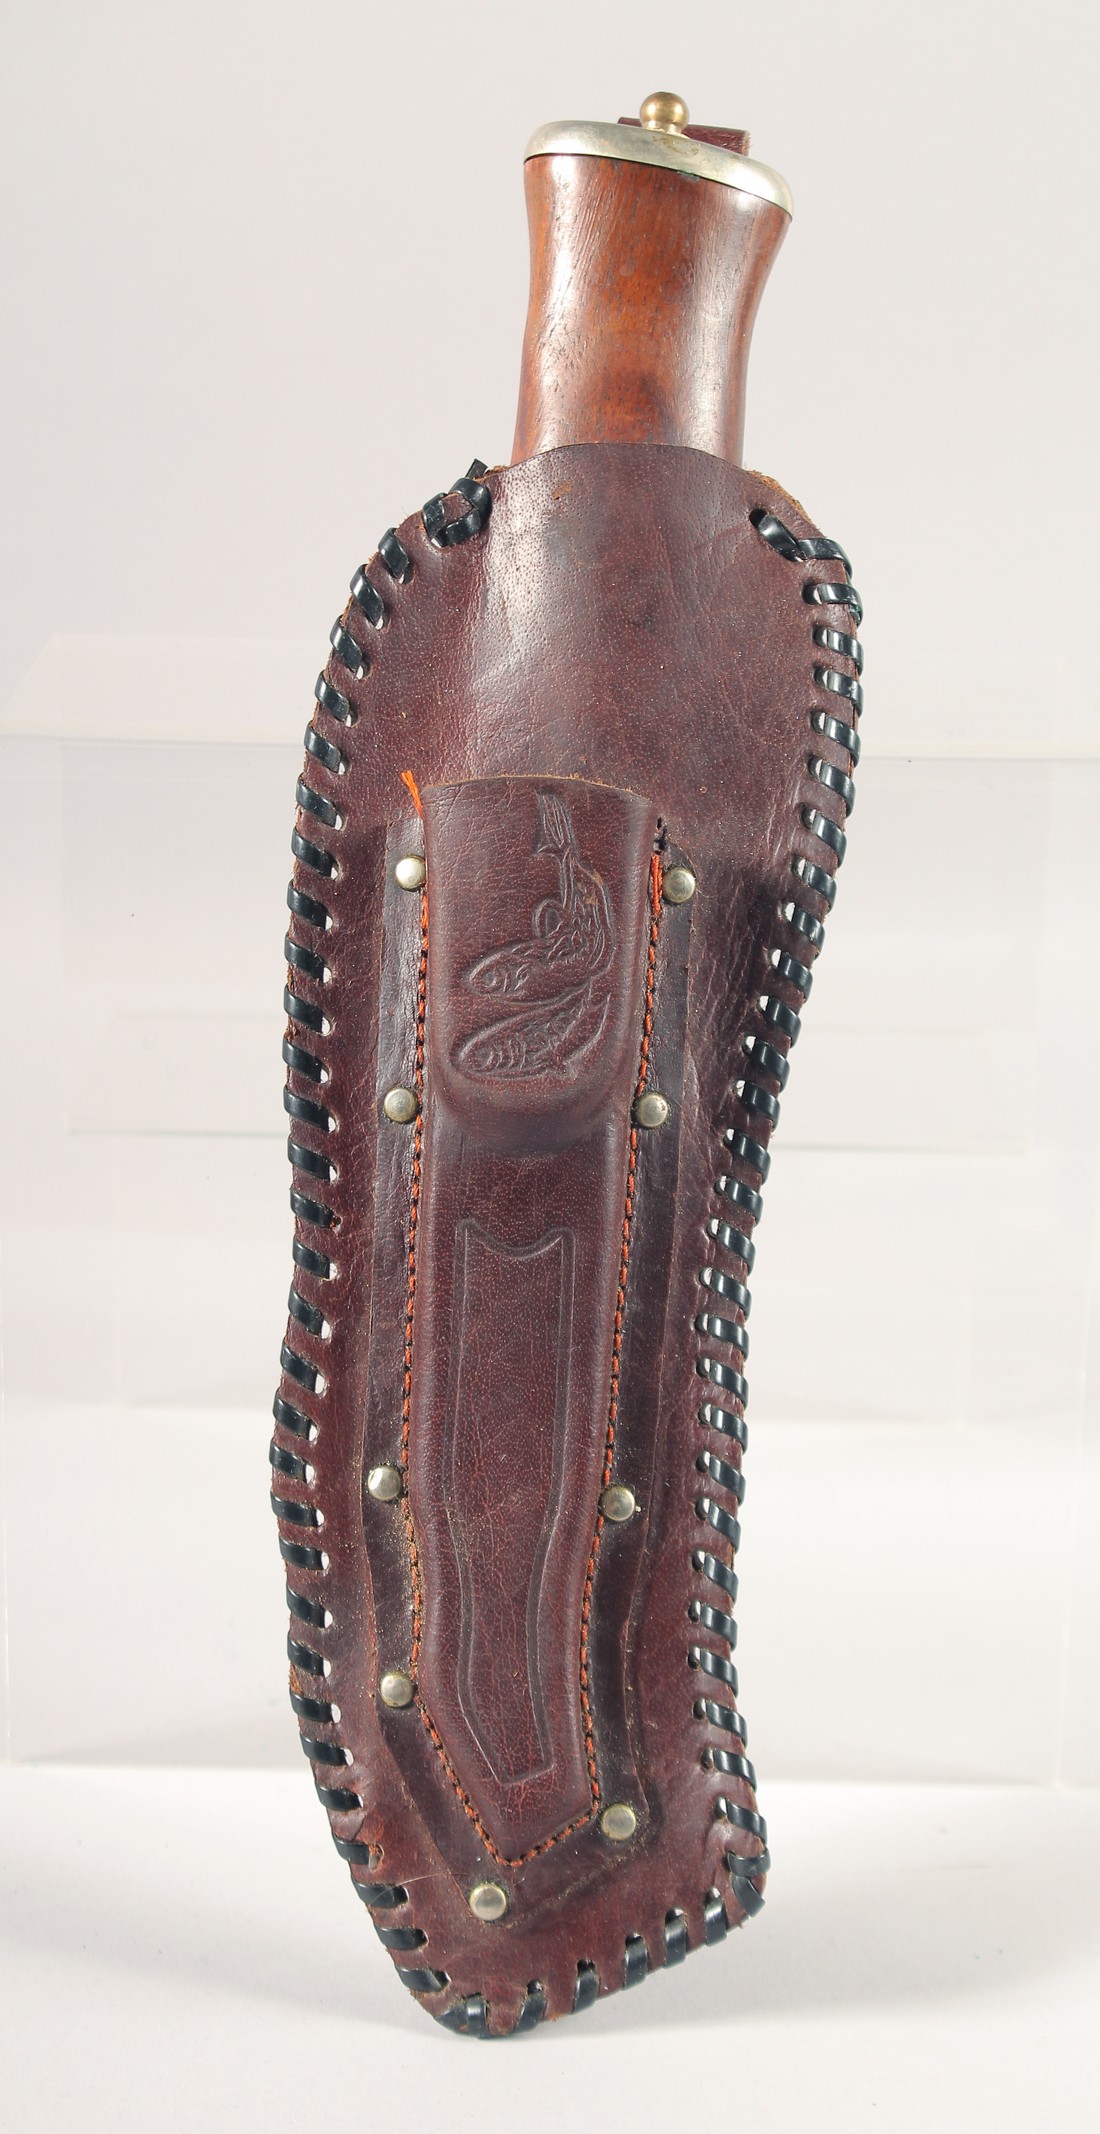 A KNIFE, with wooden handle, in a leather sheath, 11" long. - Image 4 of 4